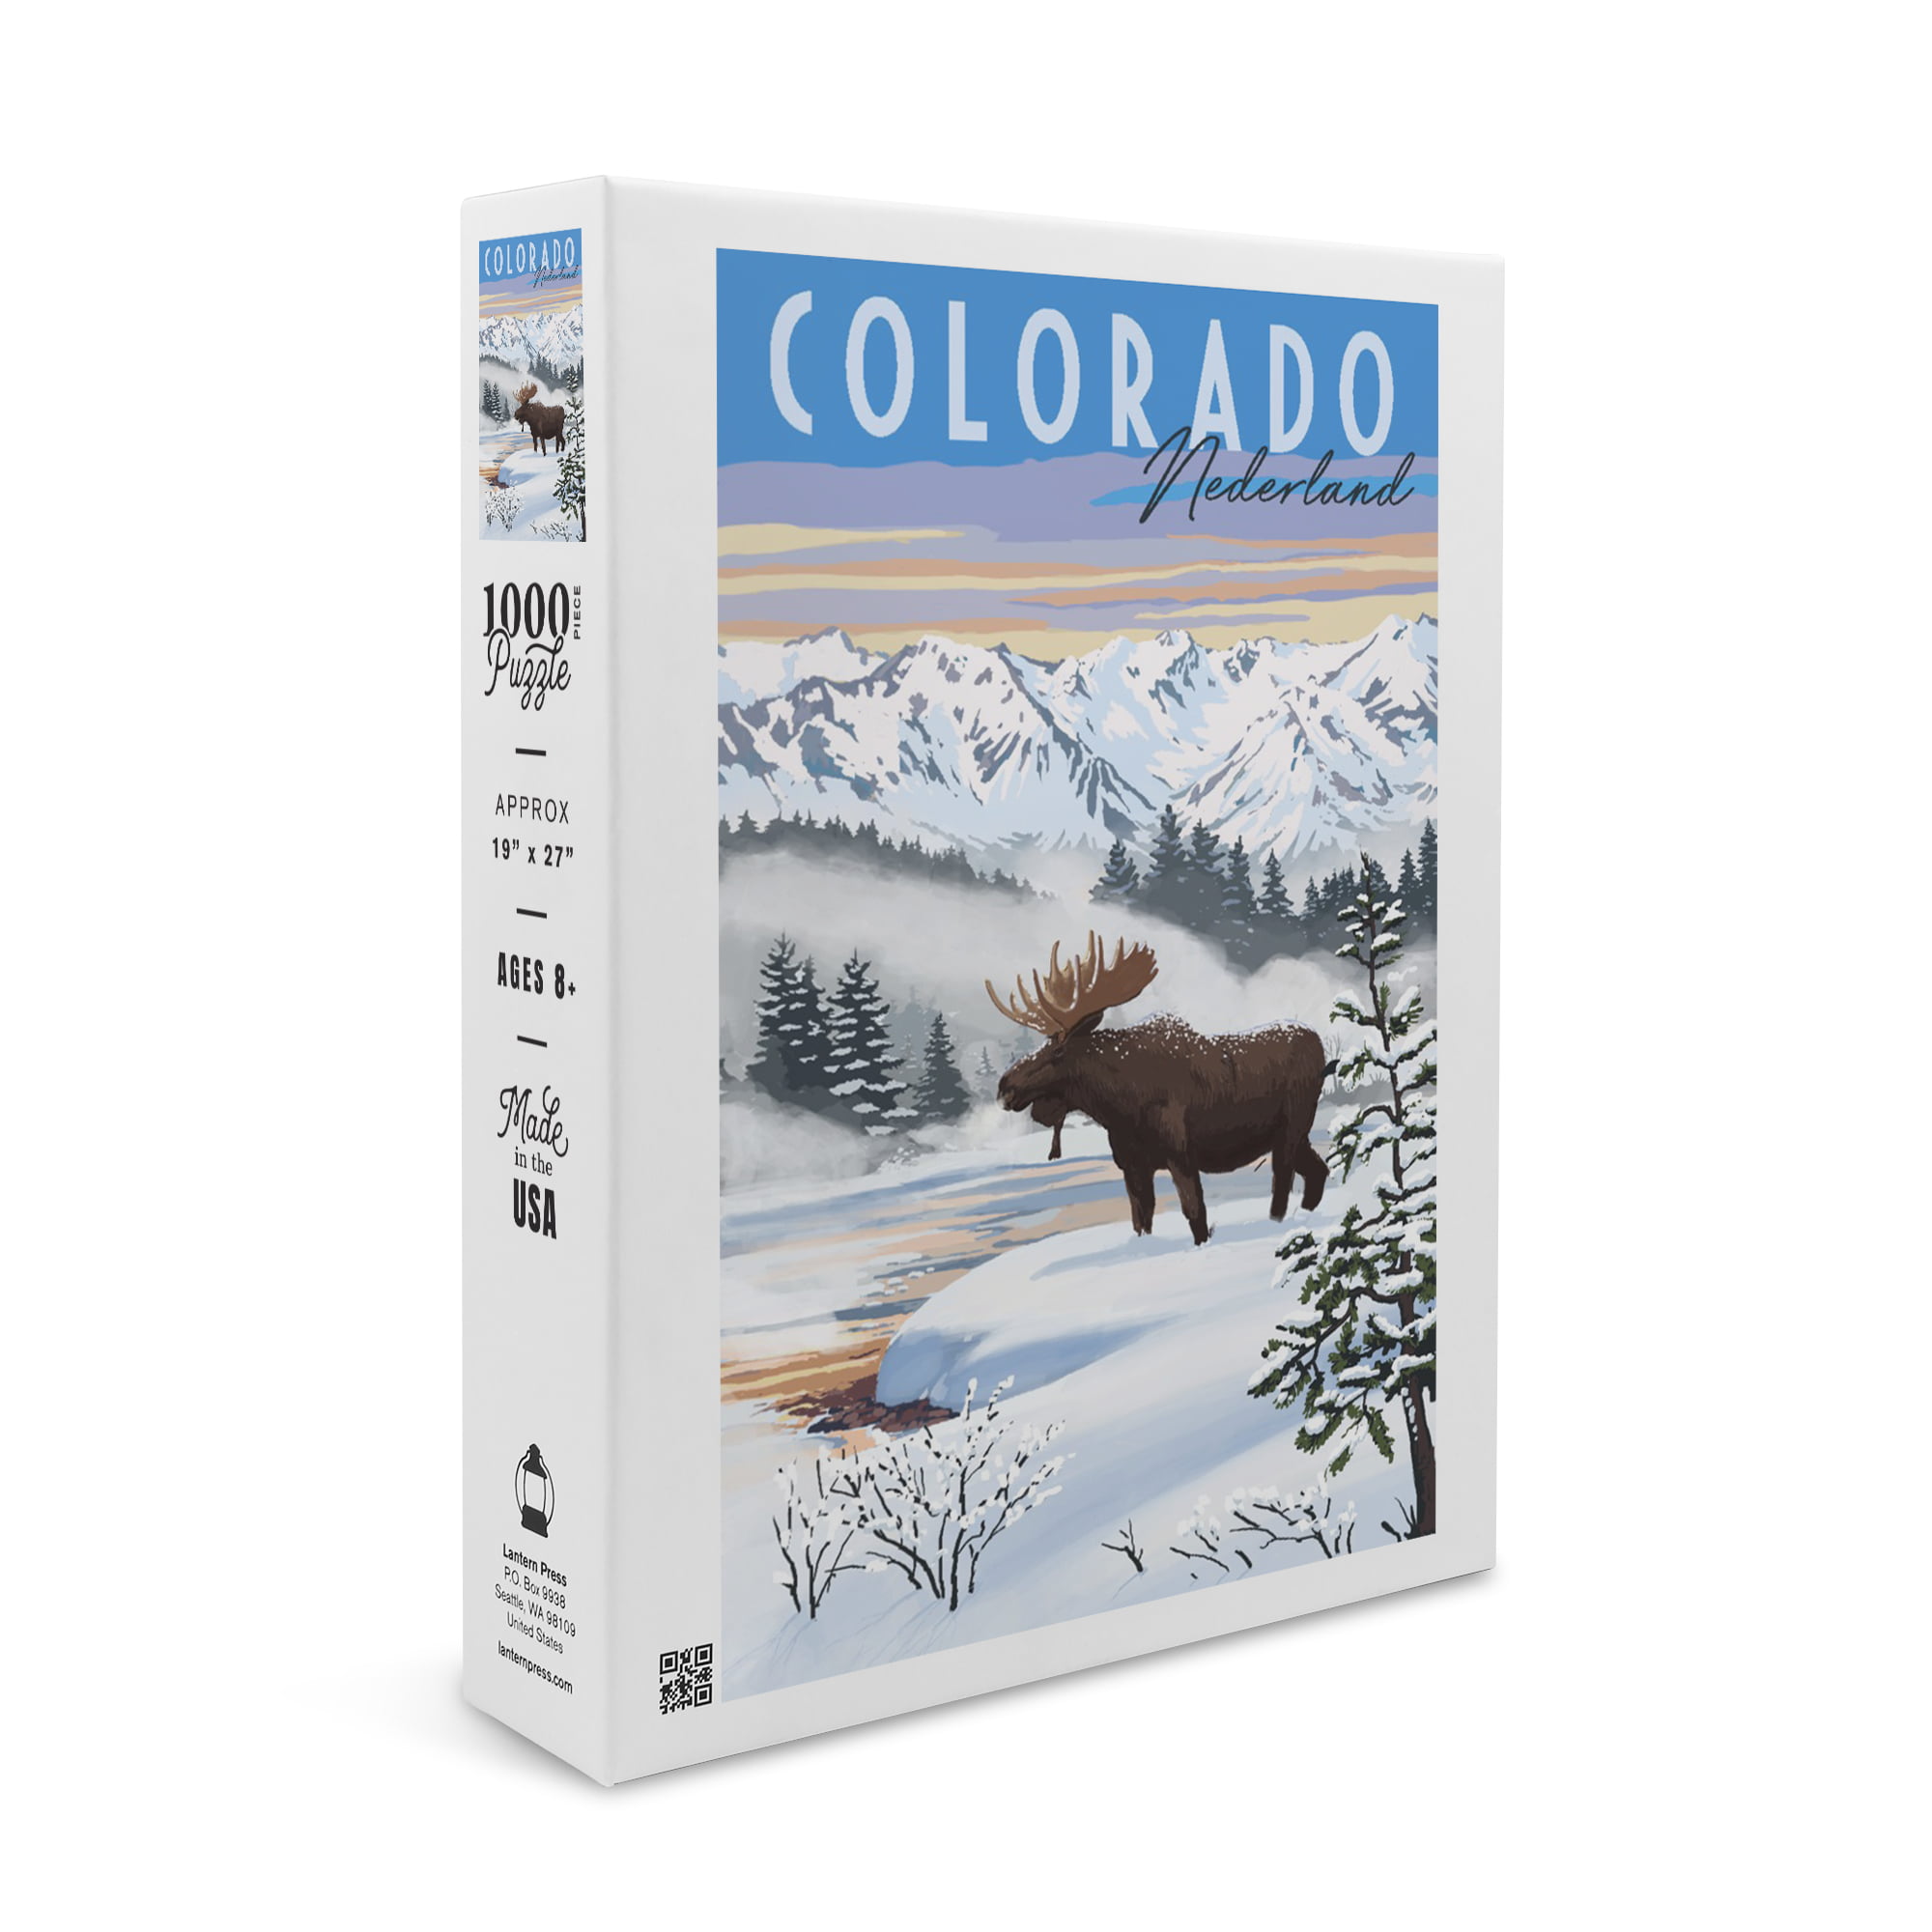 Colorado, Moose, Winter Scene (1000 Puzzle, Size 19x27, Challenging Puzzle for Adults and Family, Made in USA) - Walmart.com